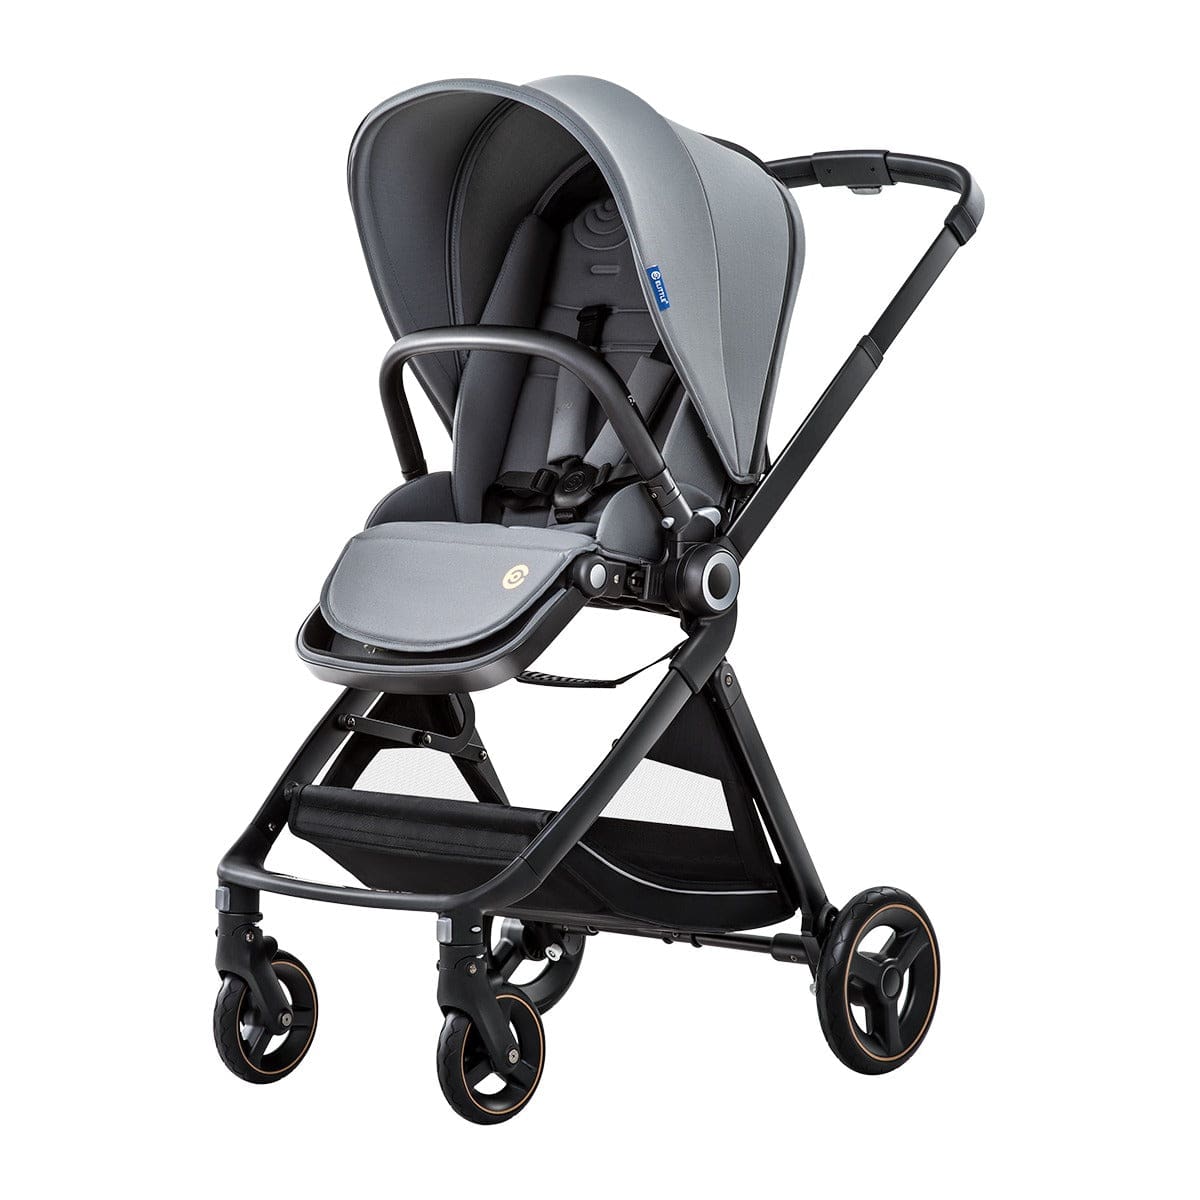 Proactive Baby eLittle Compact Stroller I Lightweight Baby Strollers